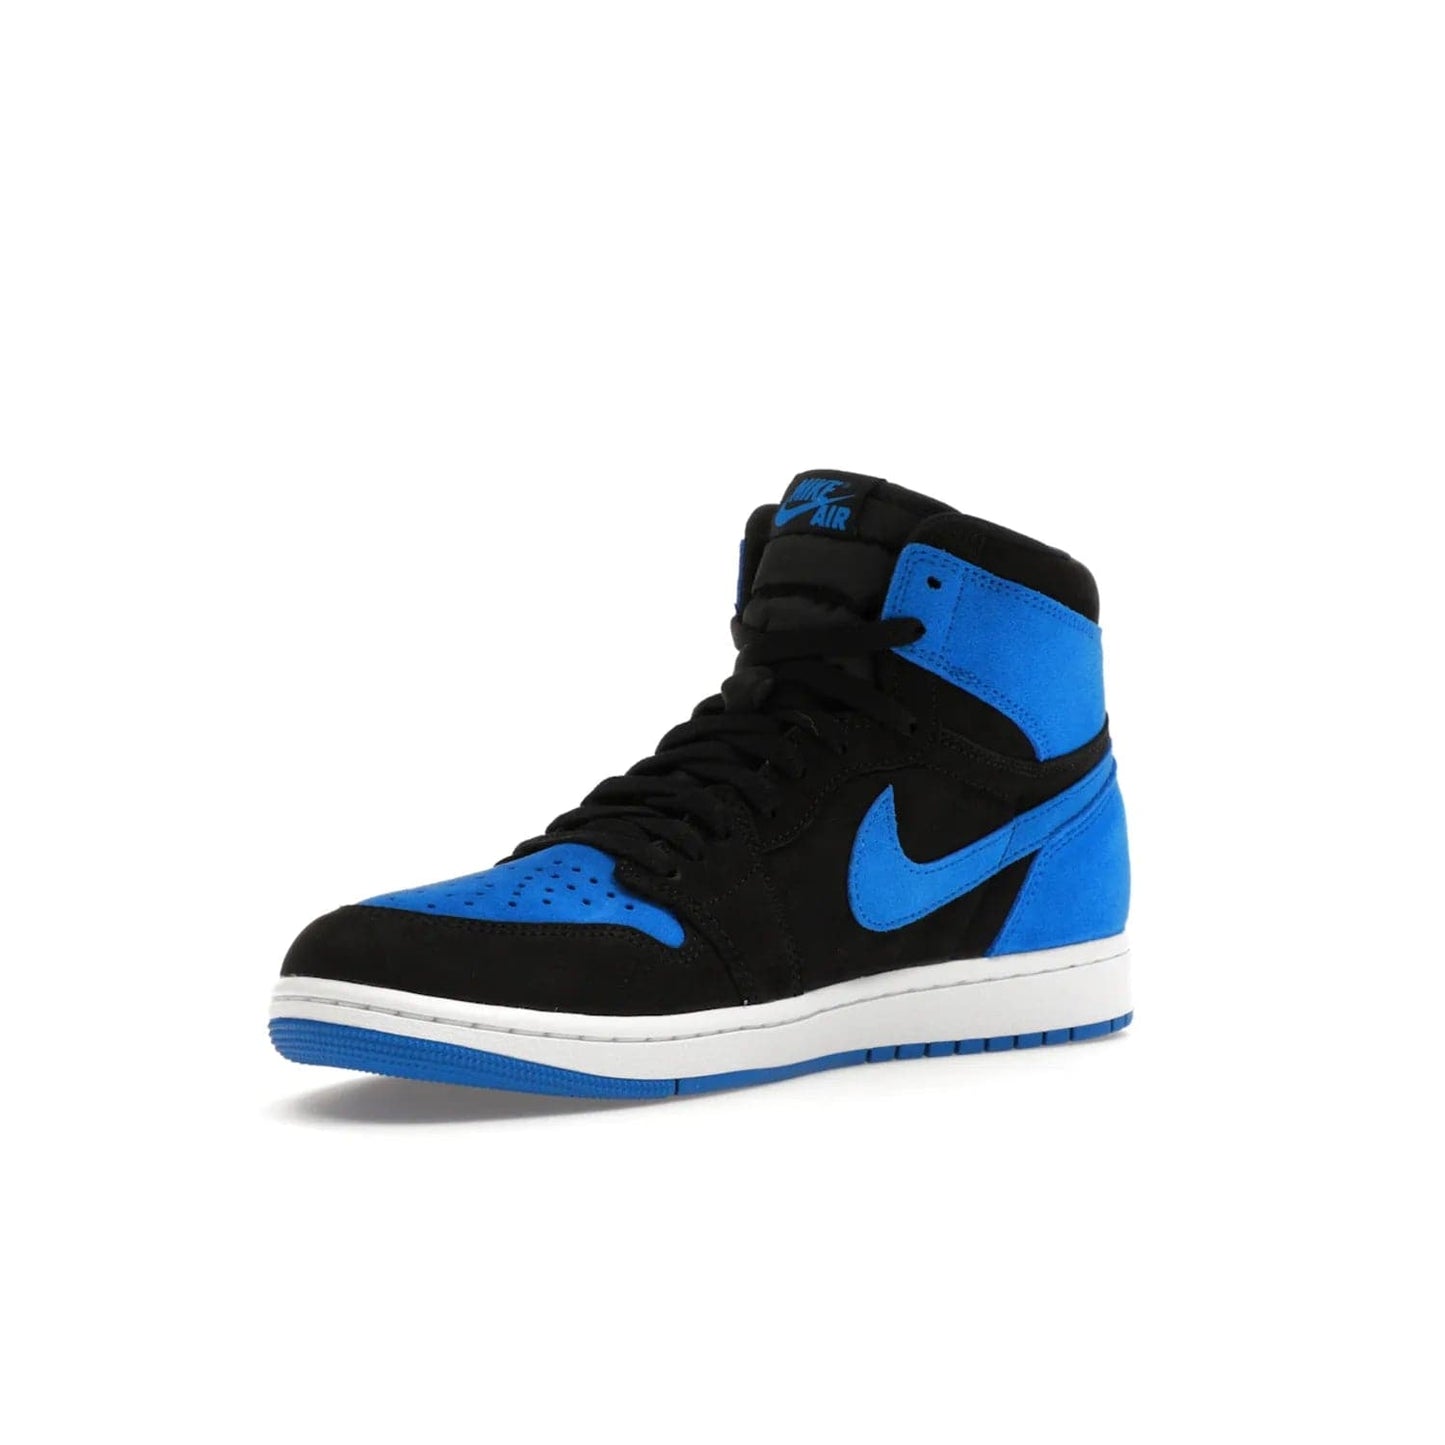 Jordan 1 Retro High OG Royal Reimagined - Image 15 - Only at www.BallersClubKickz.com - ####
Old meets the new: Jordan 1 Retro High OG 'Royal Reimagined' is a bold statement of evolution with its royal blue and black suede material makeup. Swoosh overlays, Wings logos, padded ankle collars and Nike Air tags maintain the OG's legendary lineage. Get a pair on November 4th and be part of a fearless, unyielding story.